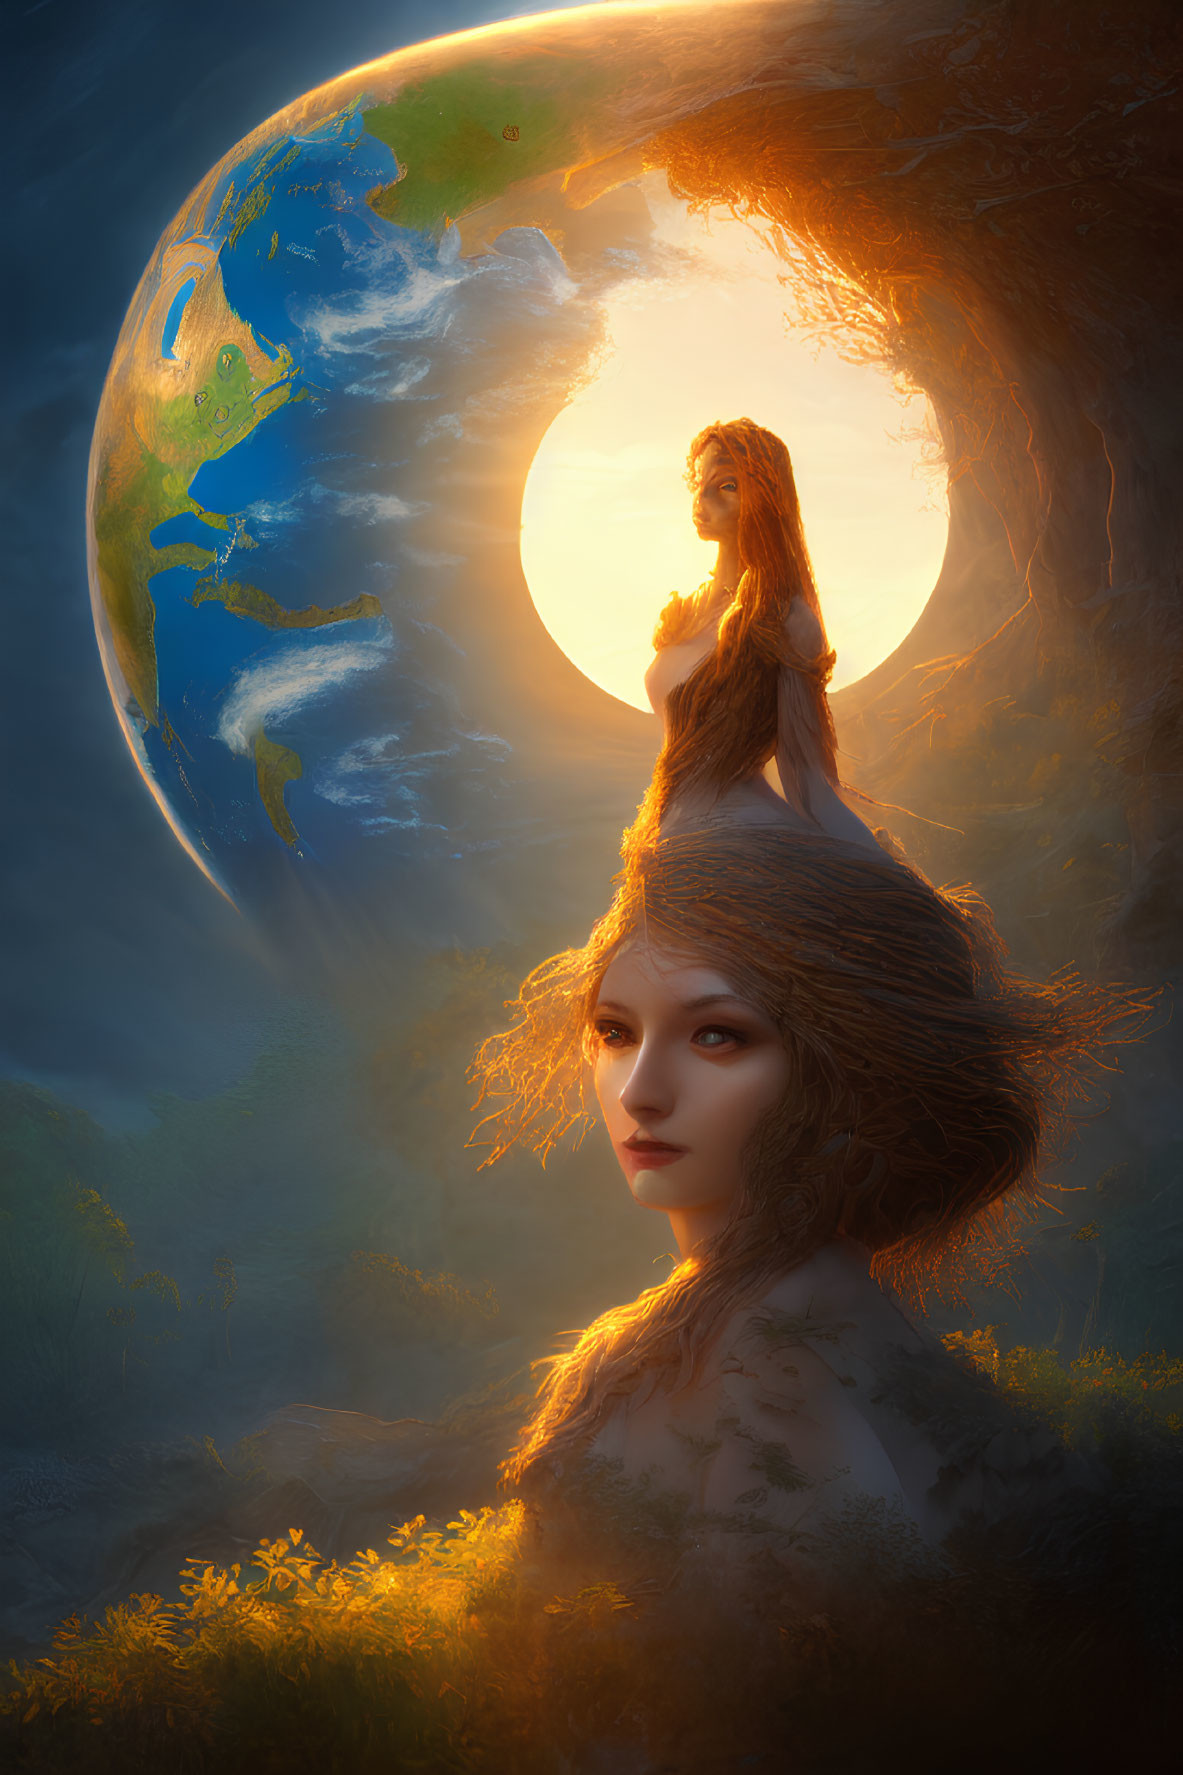 Fantastical Artwork: Entwined Female Figures with Earth and Sun Background